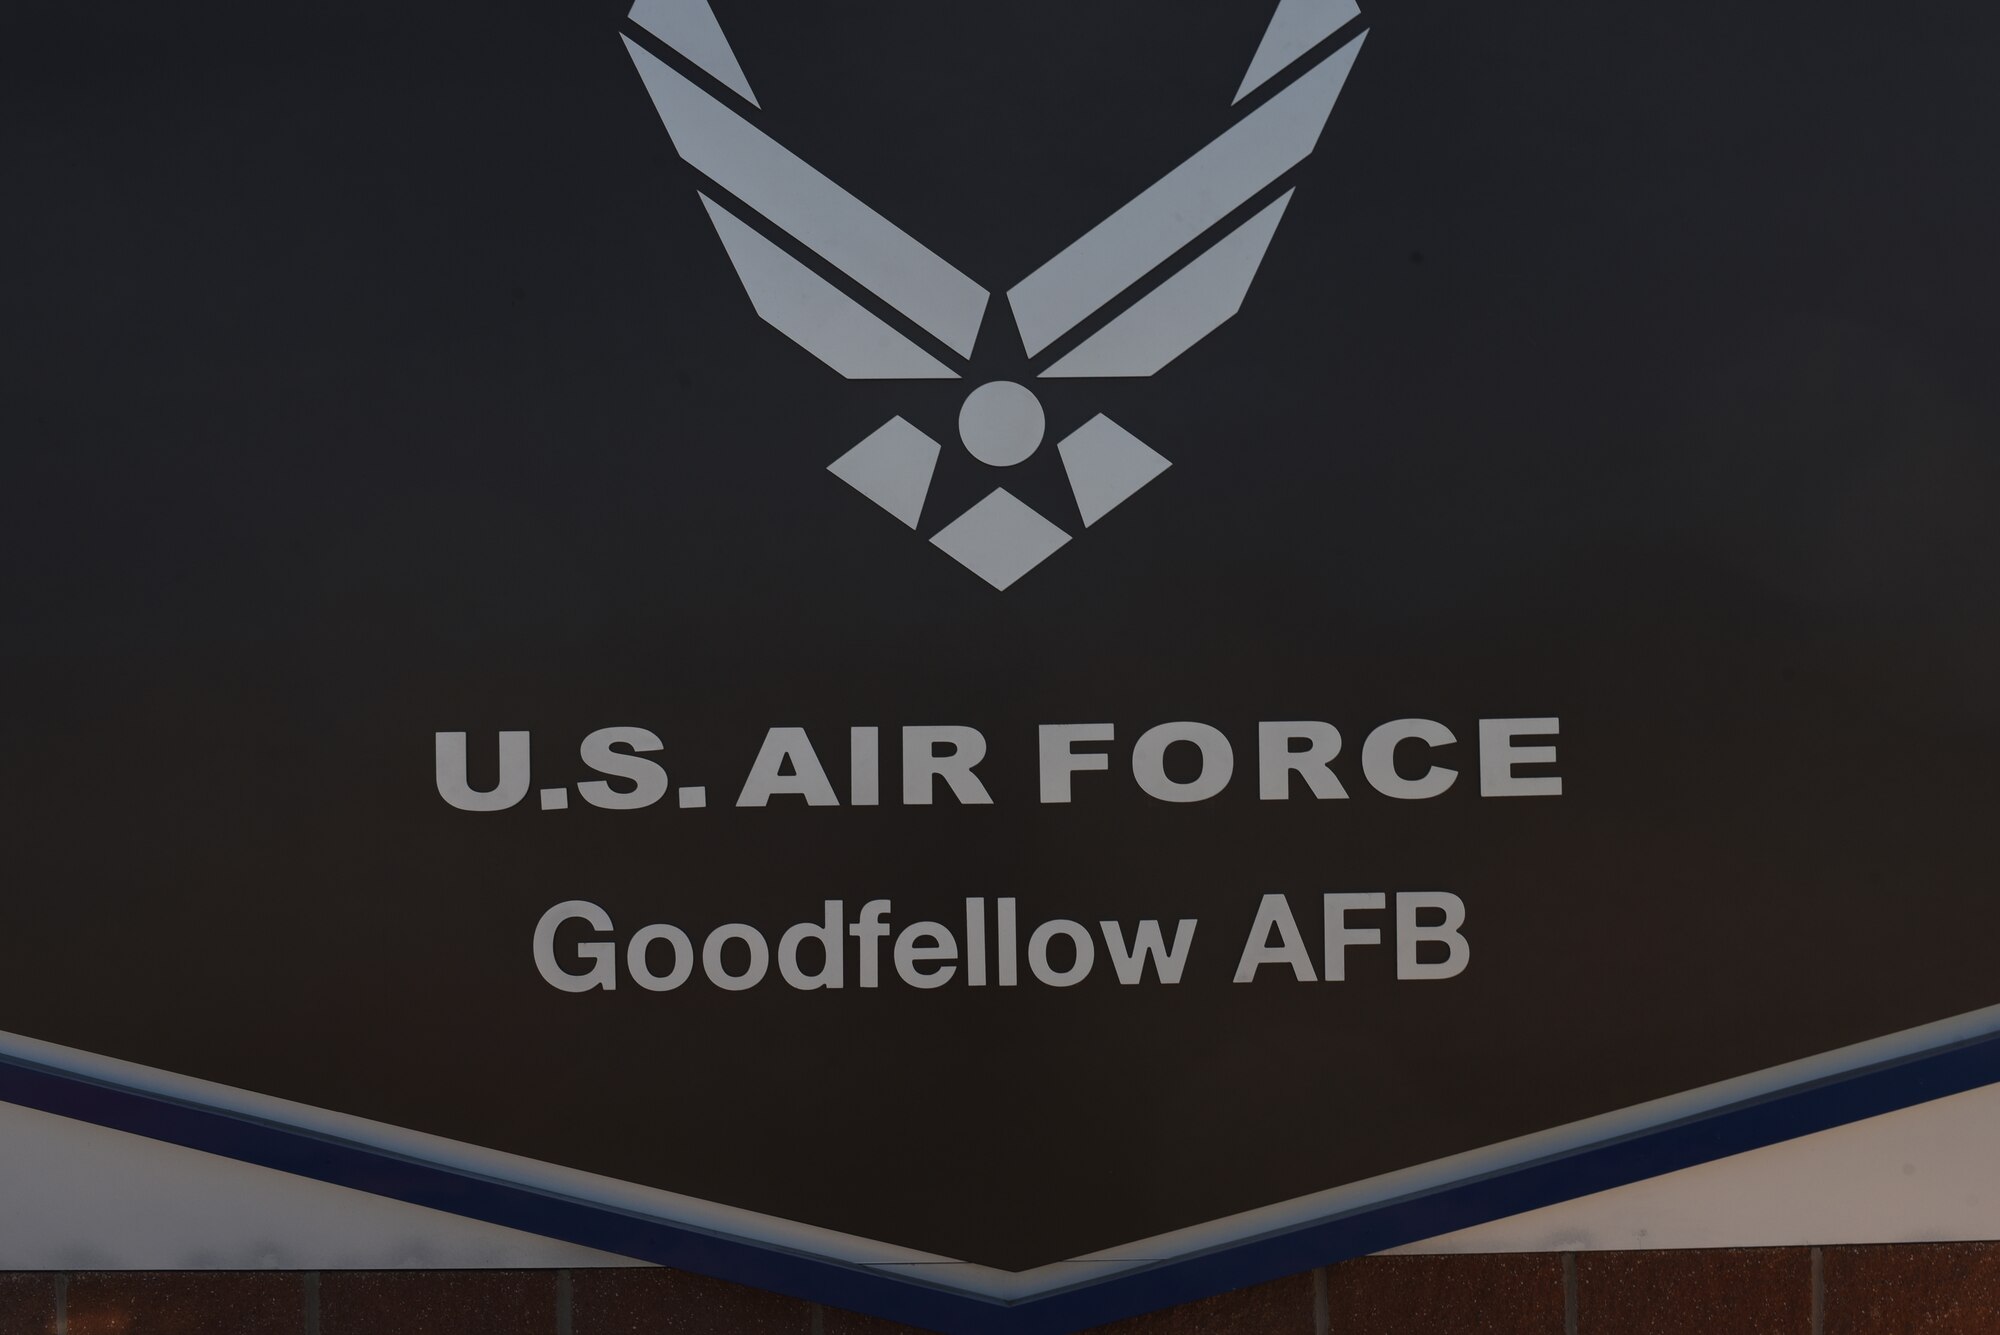 The new sign outside of the Jacobson Gate on Goodfellow Air Force Base, Texas, May 20, 2021. The new signs were completed on May 27, 2021. (U.S. Air Force photo by Senior Airman Abbey Rieves)